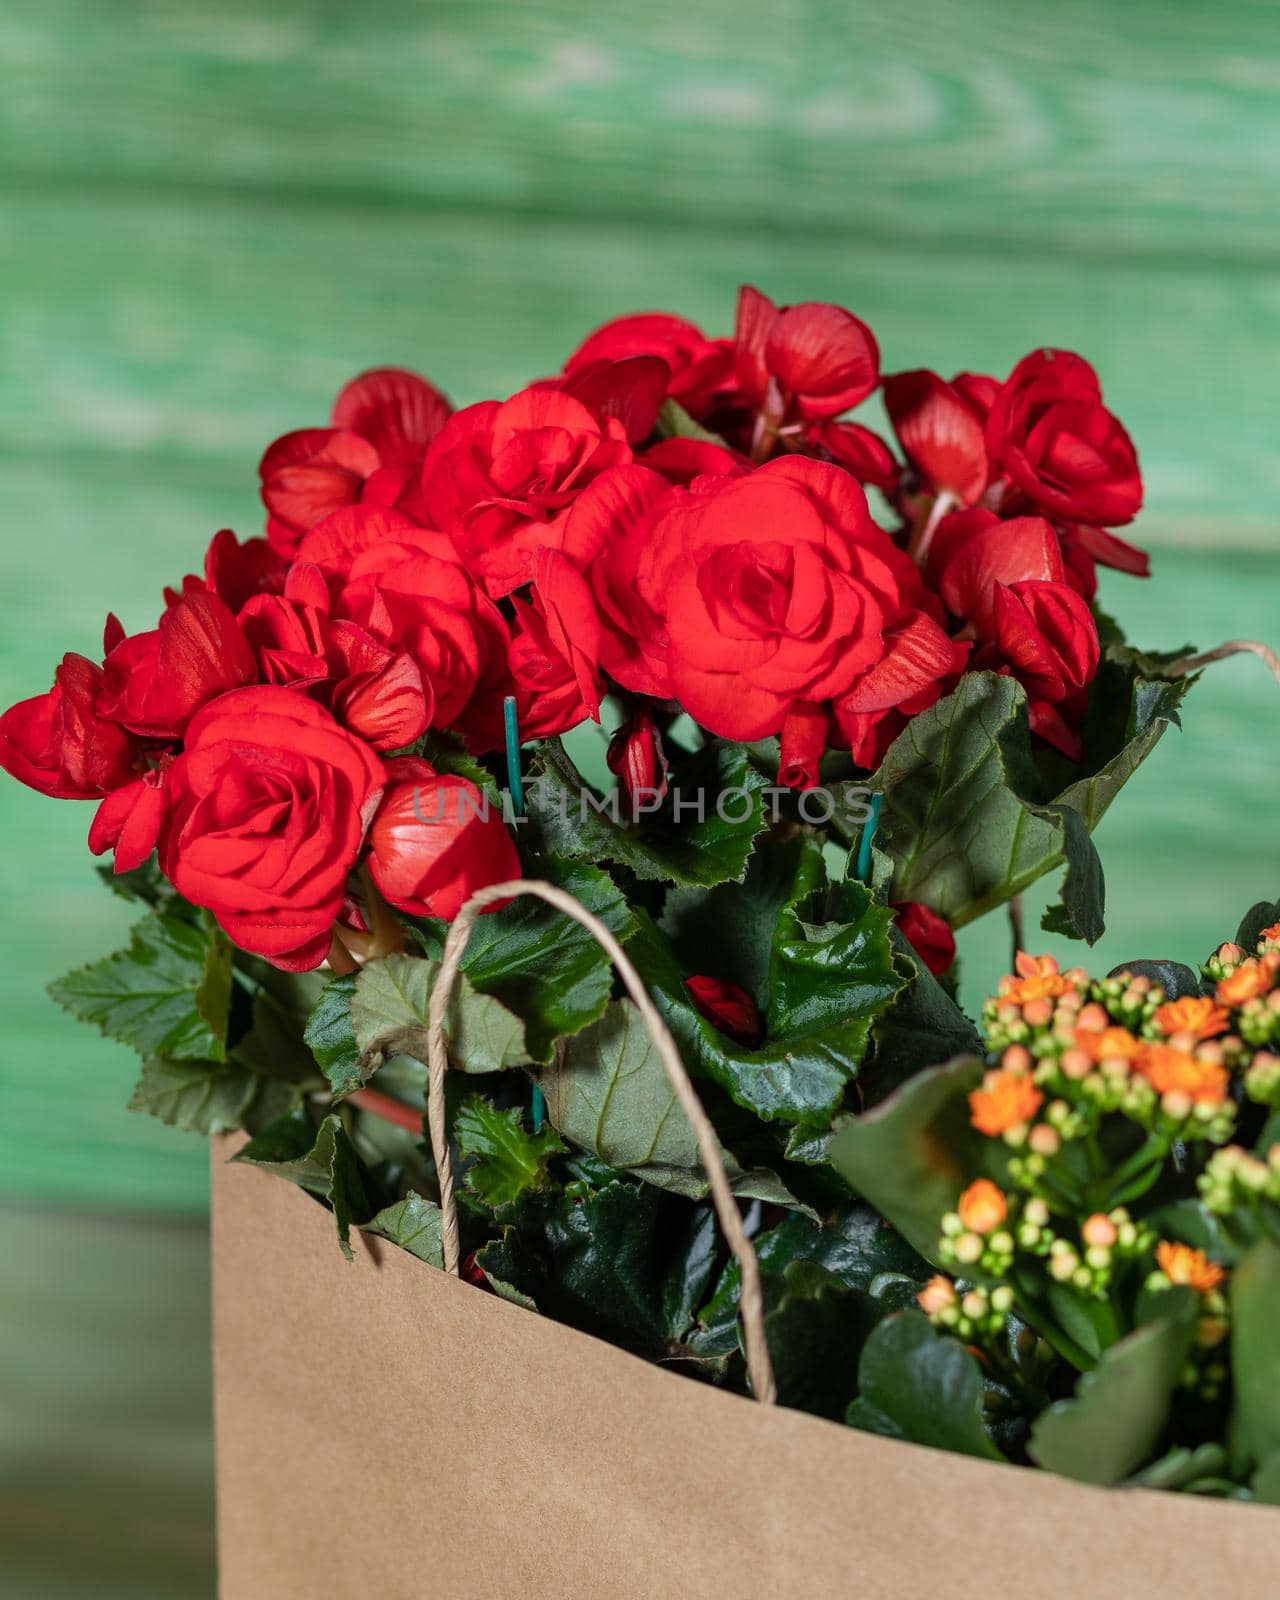 Begonia and kalanchoe in the shopping bag with green background by ferhad